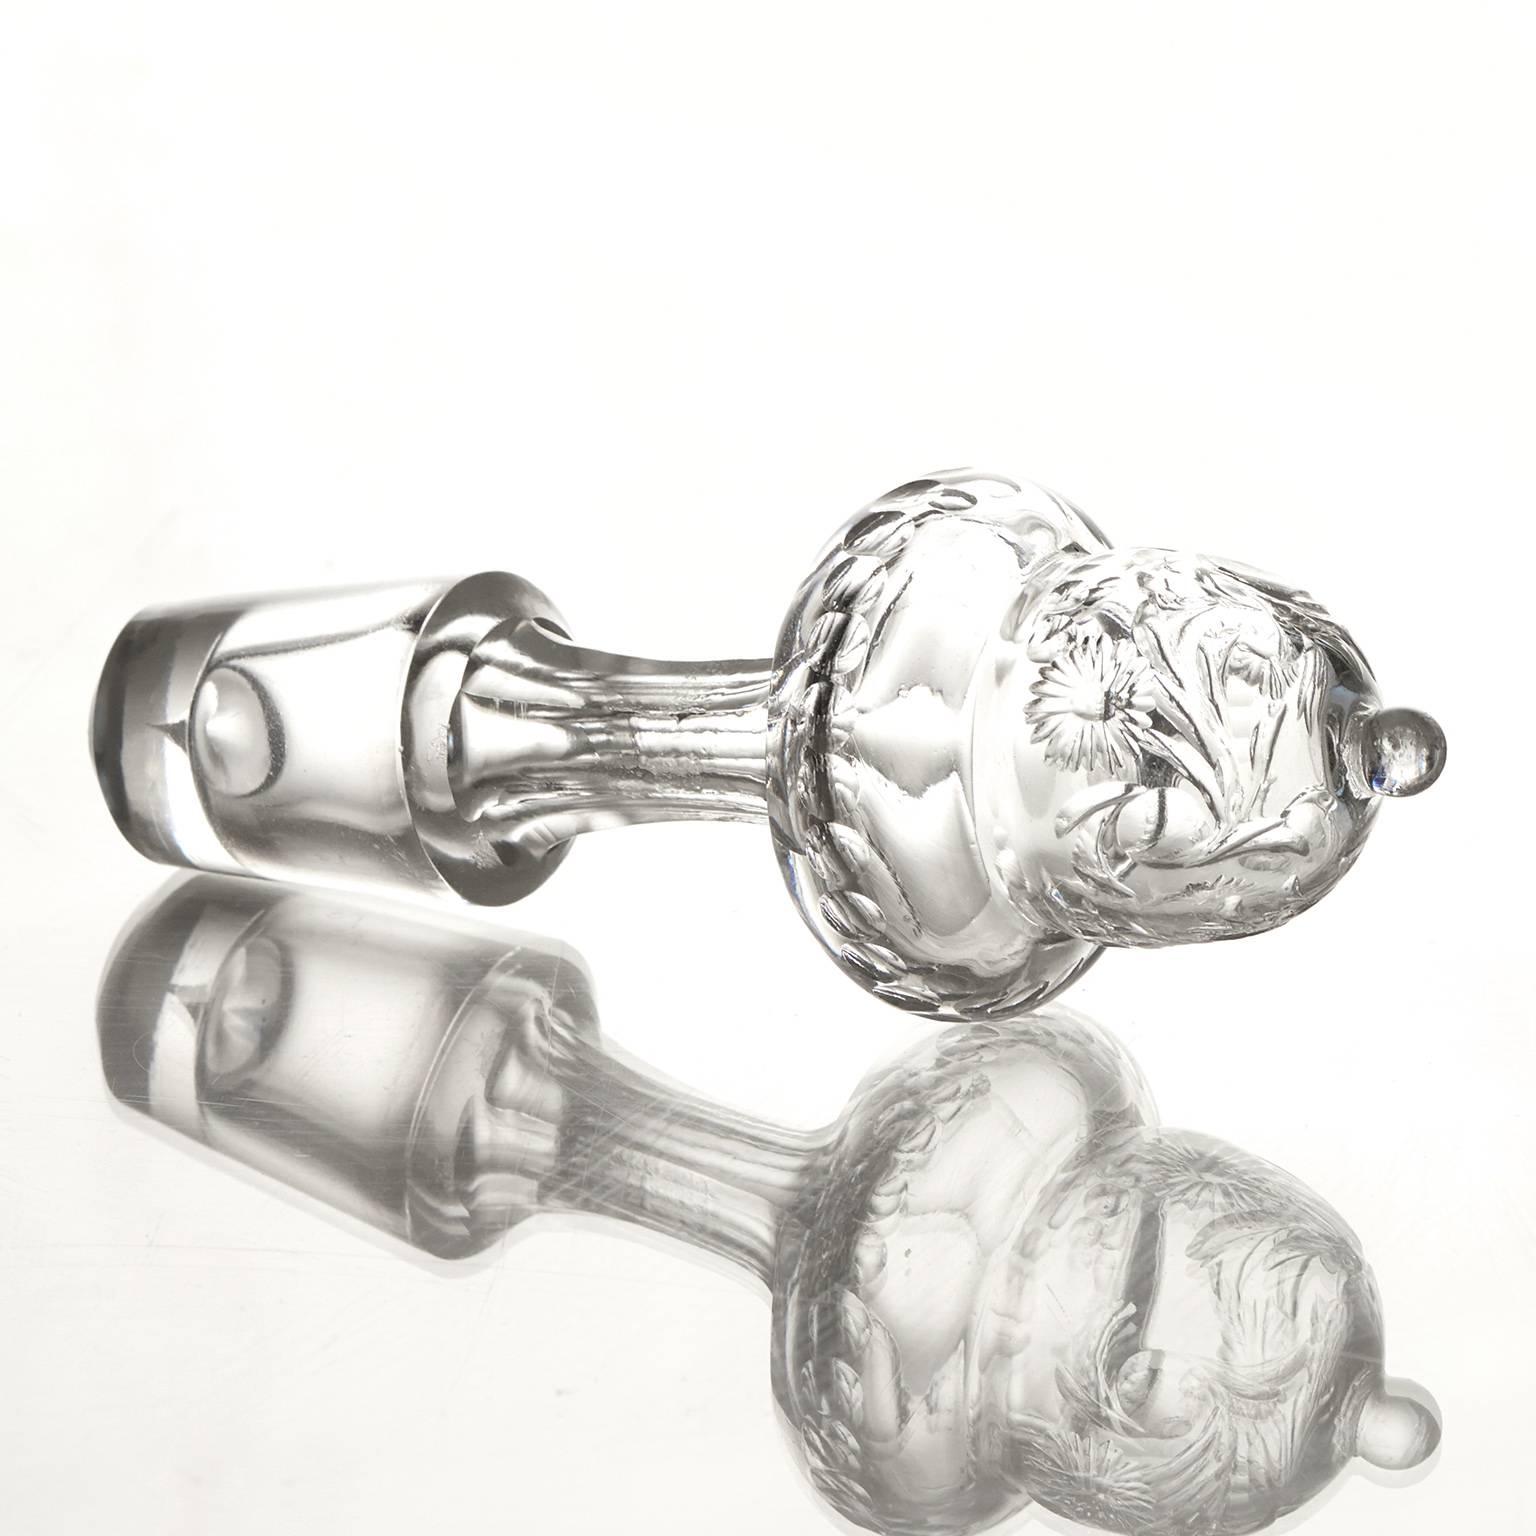 Pair of Rock Crystal Scent Bottles by Webb 3